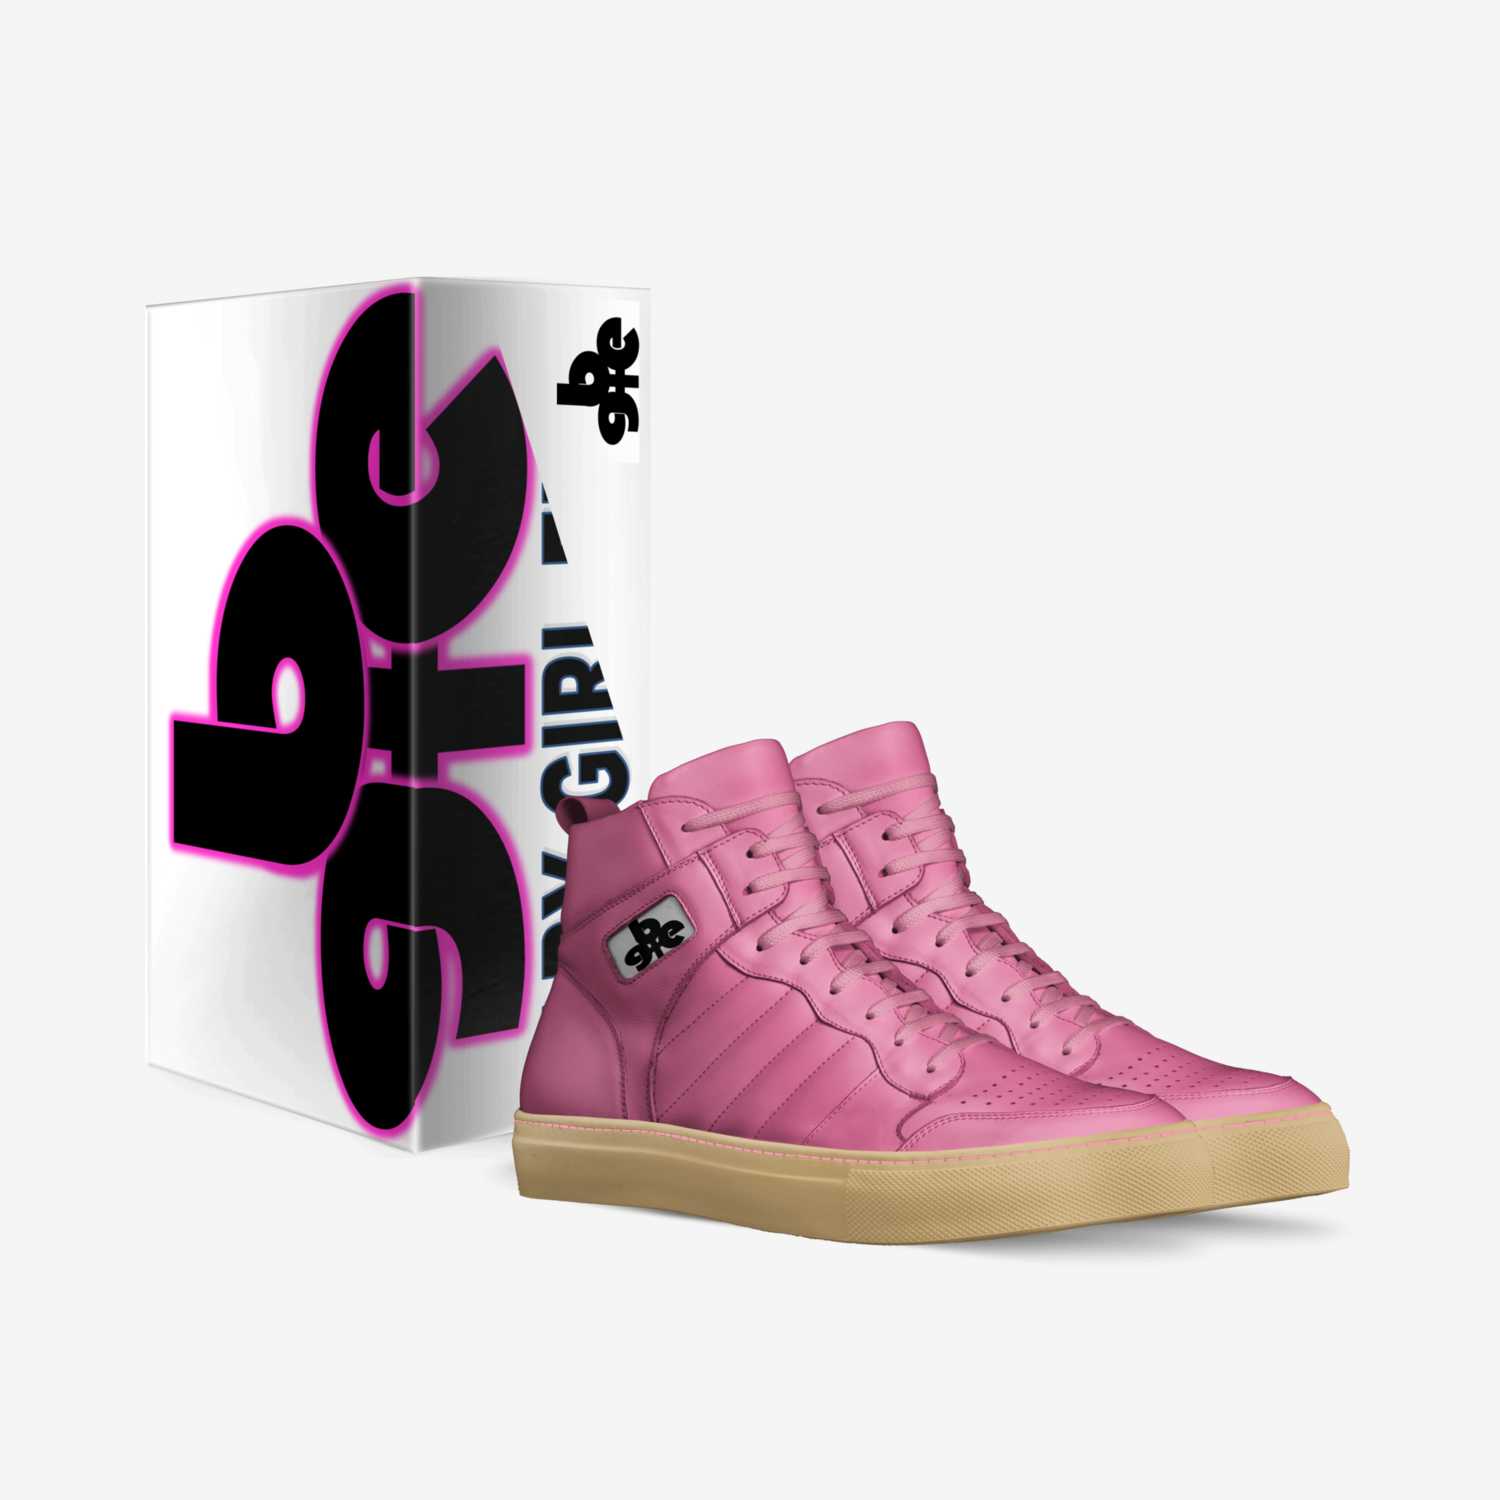 School 6 SJ1 Salto custom made in Italy shoes by Baby Girl Elite | Box view